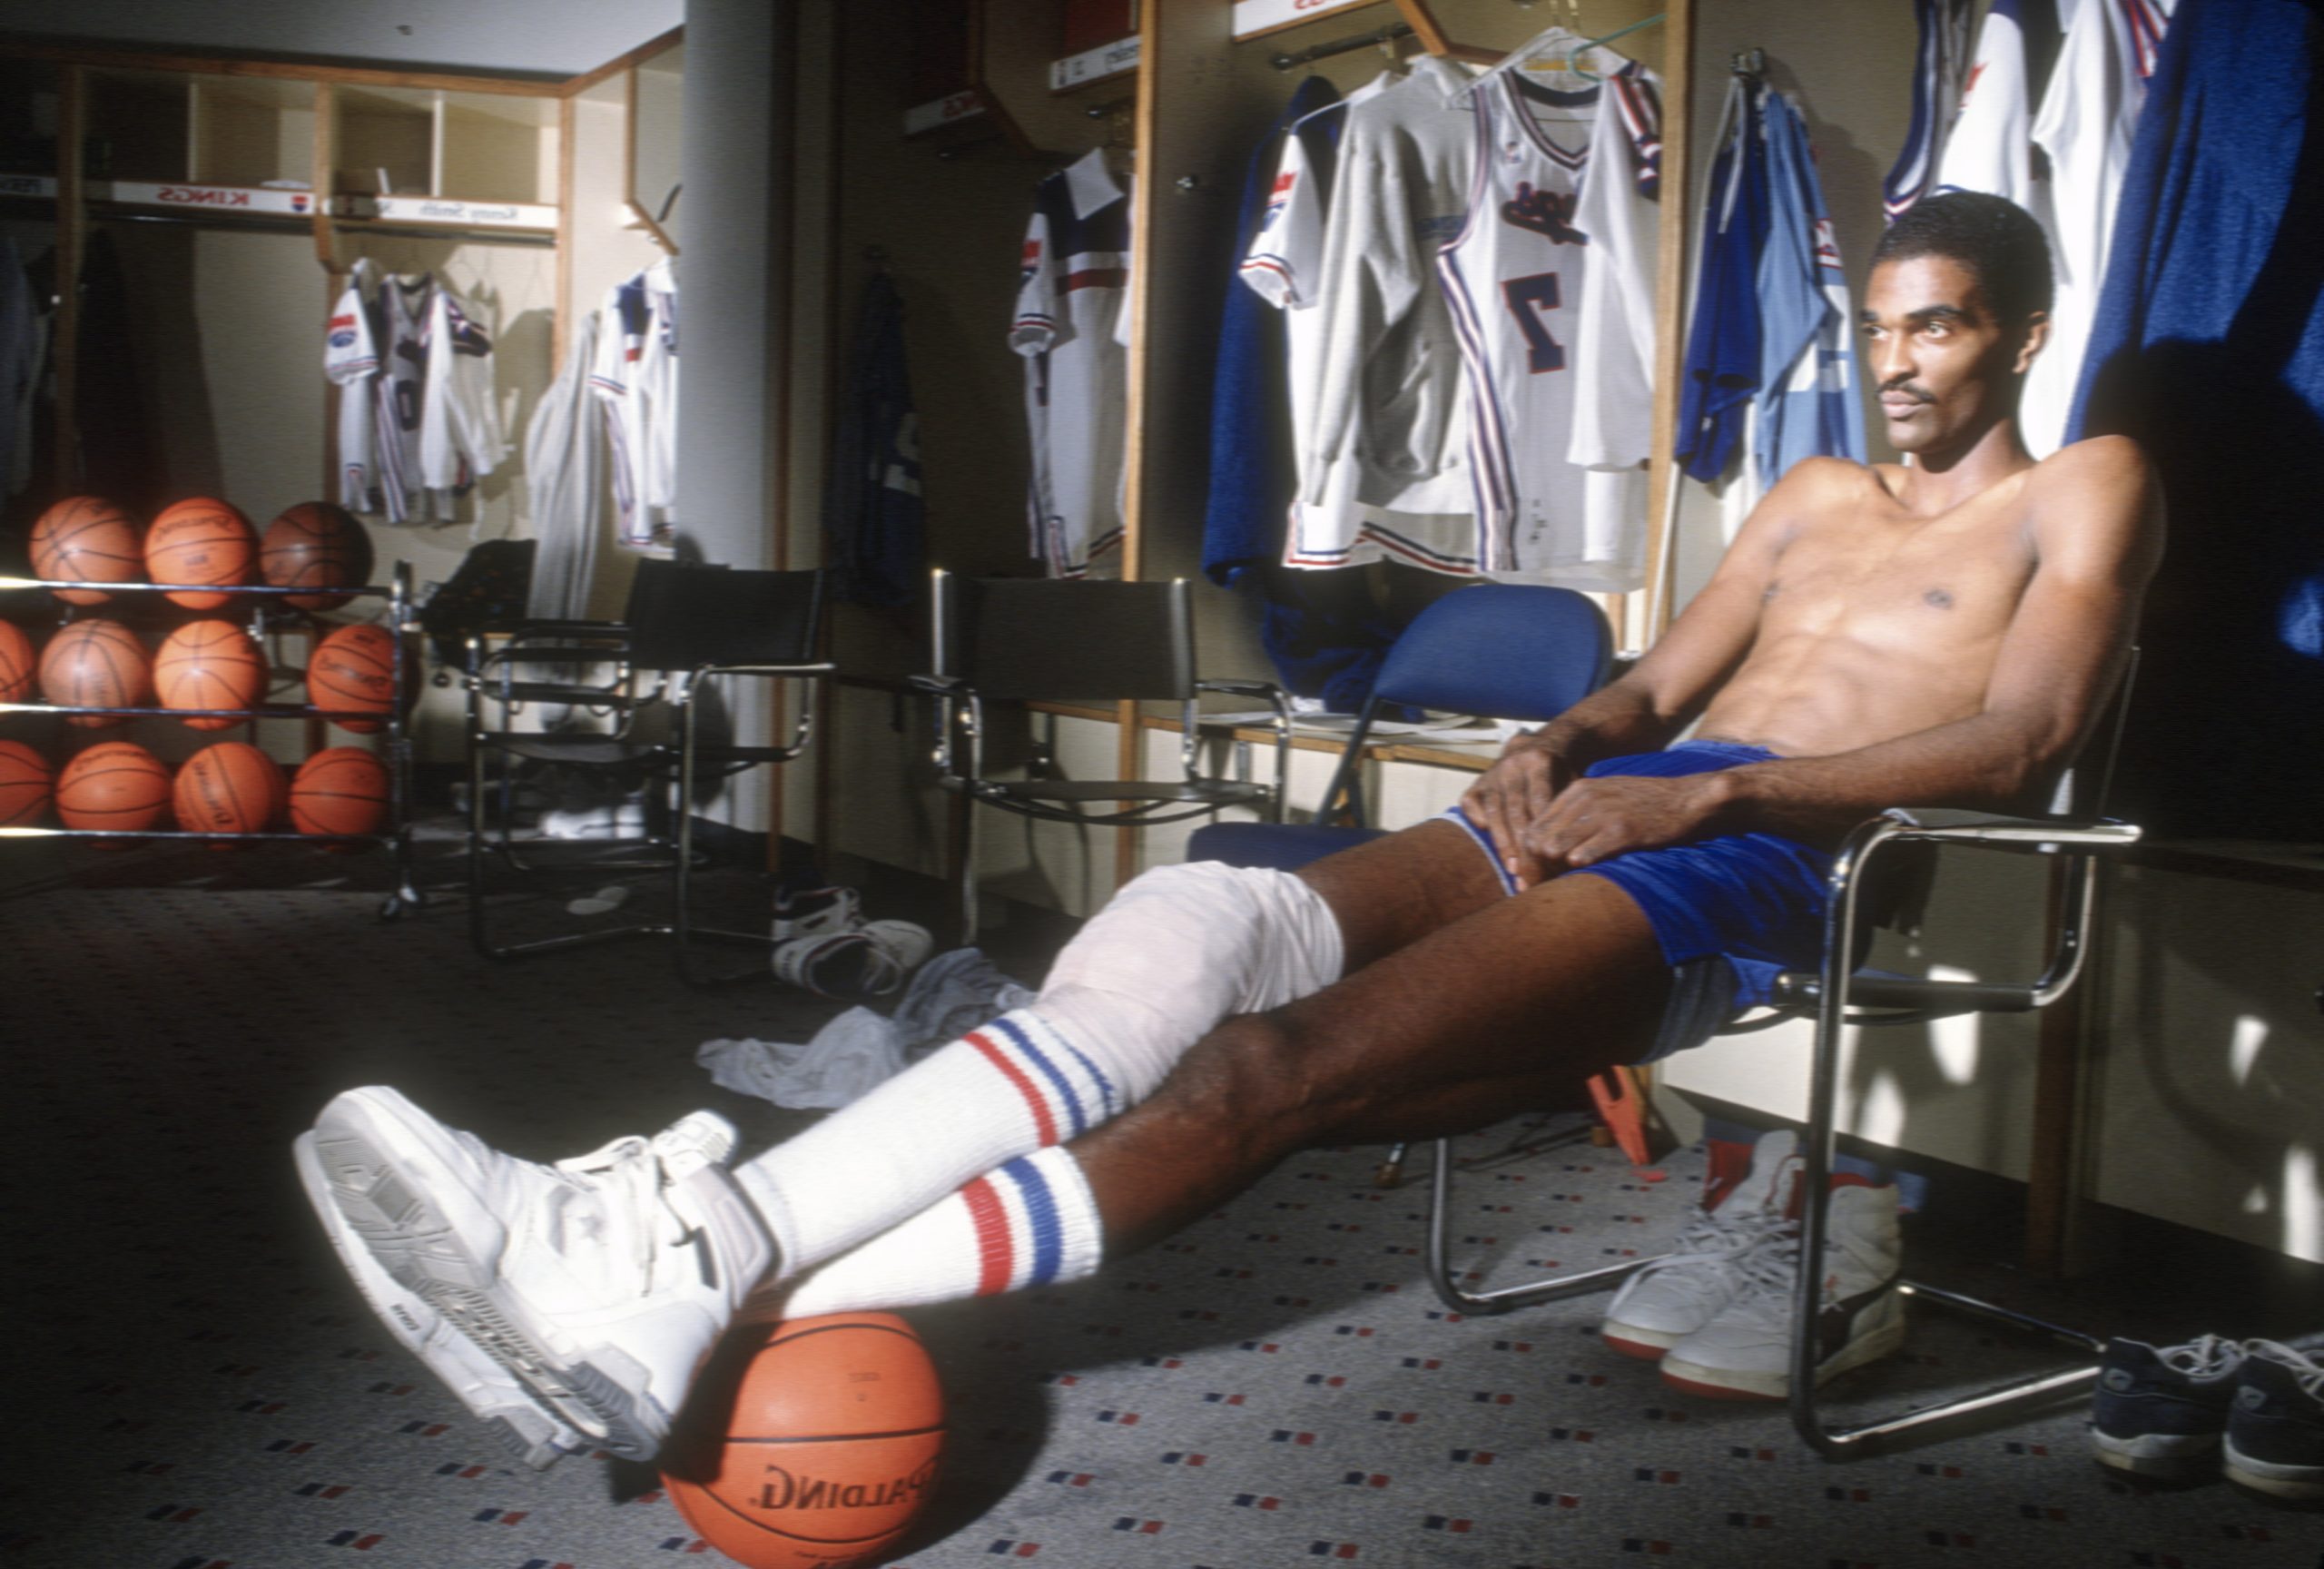 Ralph Sampson of the Sacramento Kings sits in the locker room prior to the start of an NBA basketball game circa 1989.